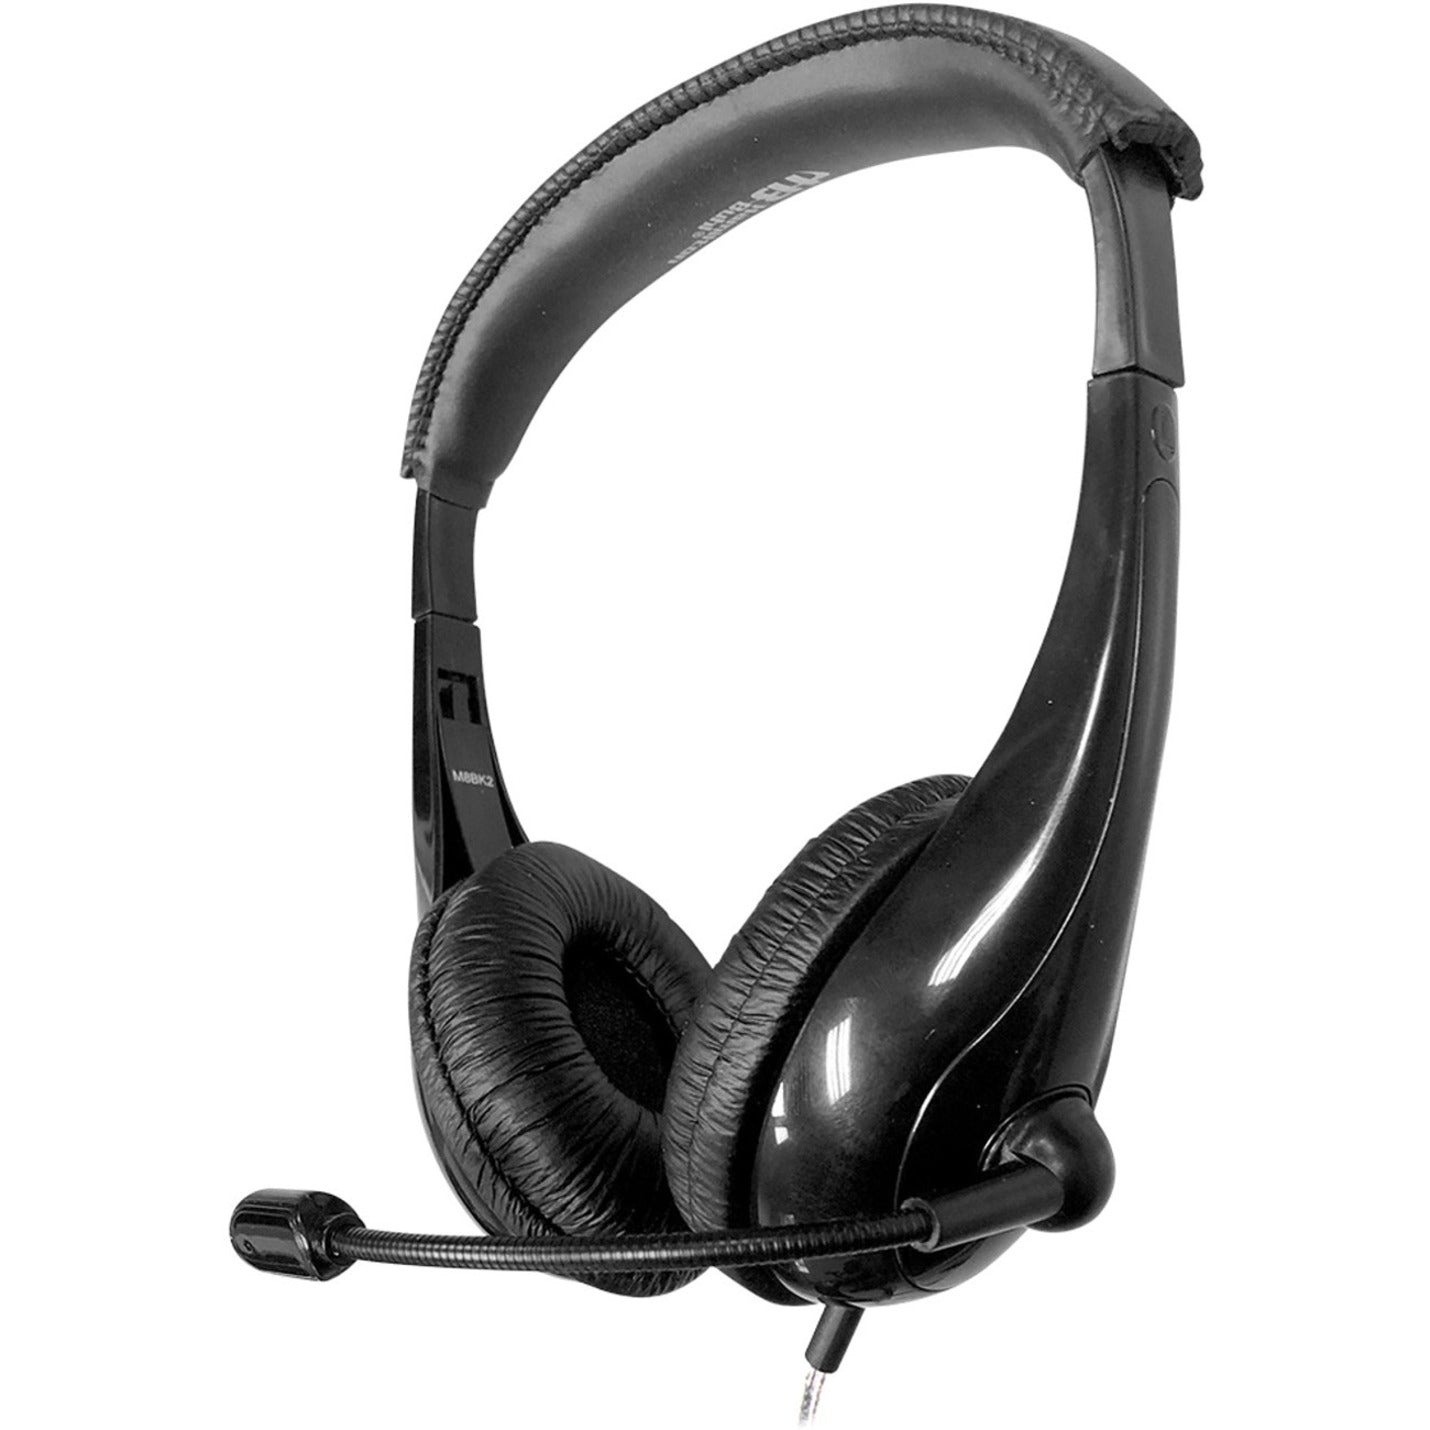 Hamilton Buhl M8BK2 Motiv8 TRRS Classroom Headset with Gooseneck Mic and In-Line Volume Control, Lightweight and Durable